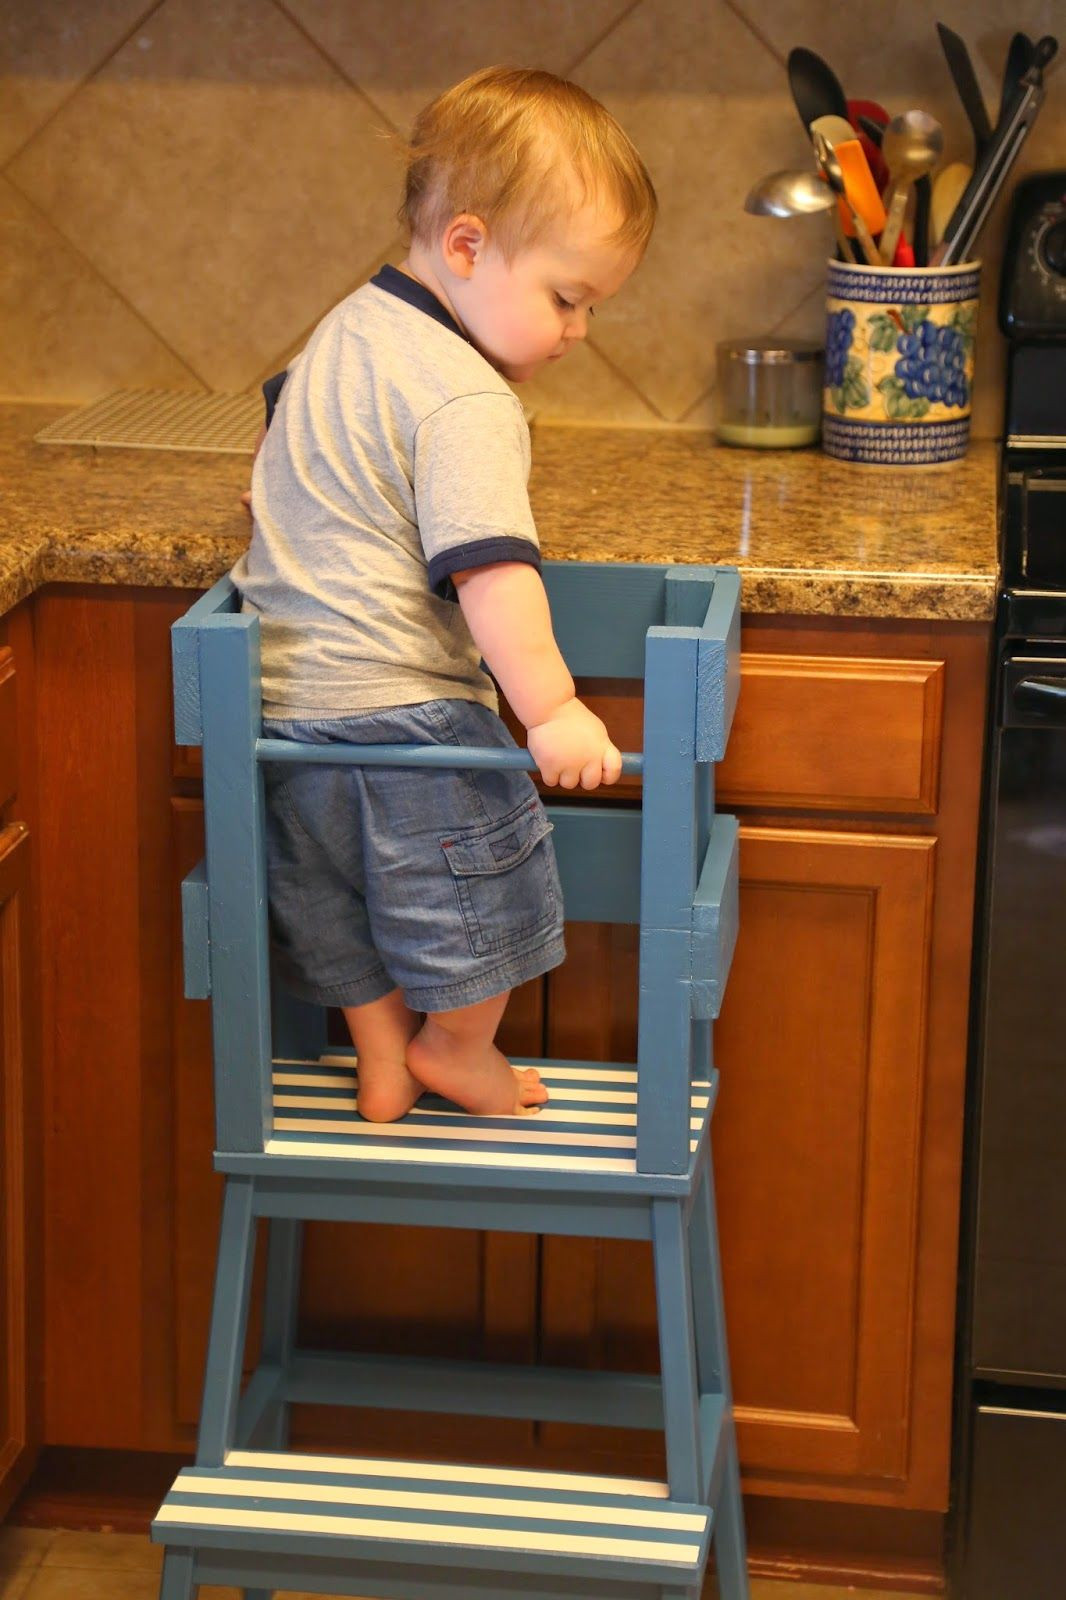 DIY Step Stool For Toddler
 DIY Step Stool with Rails Easy and affordable